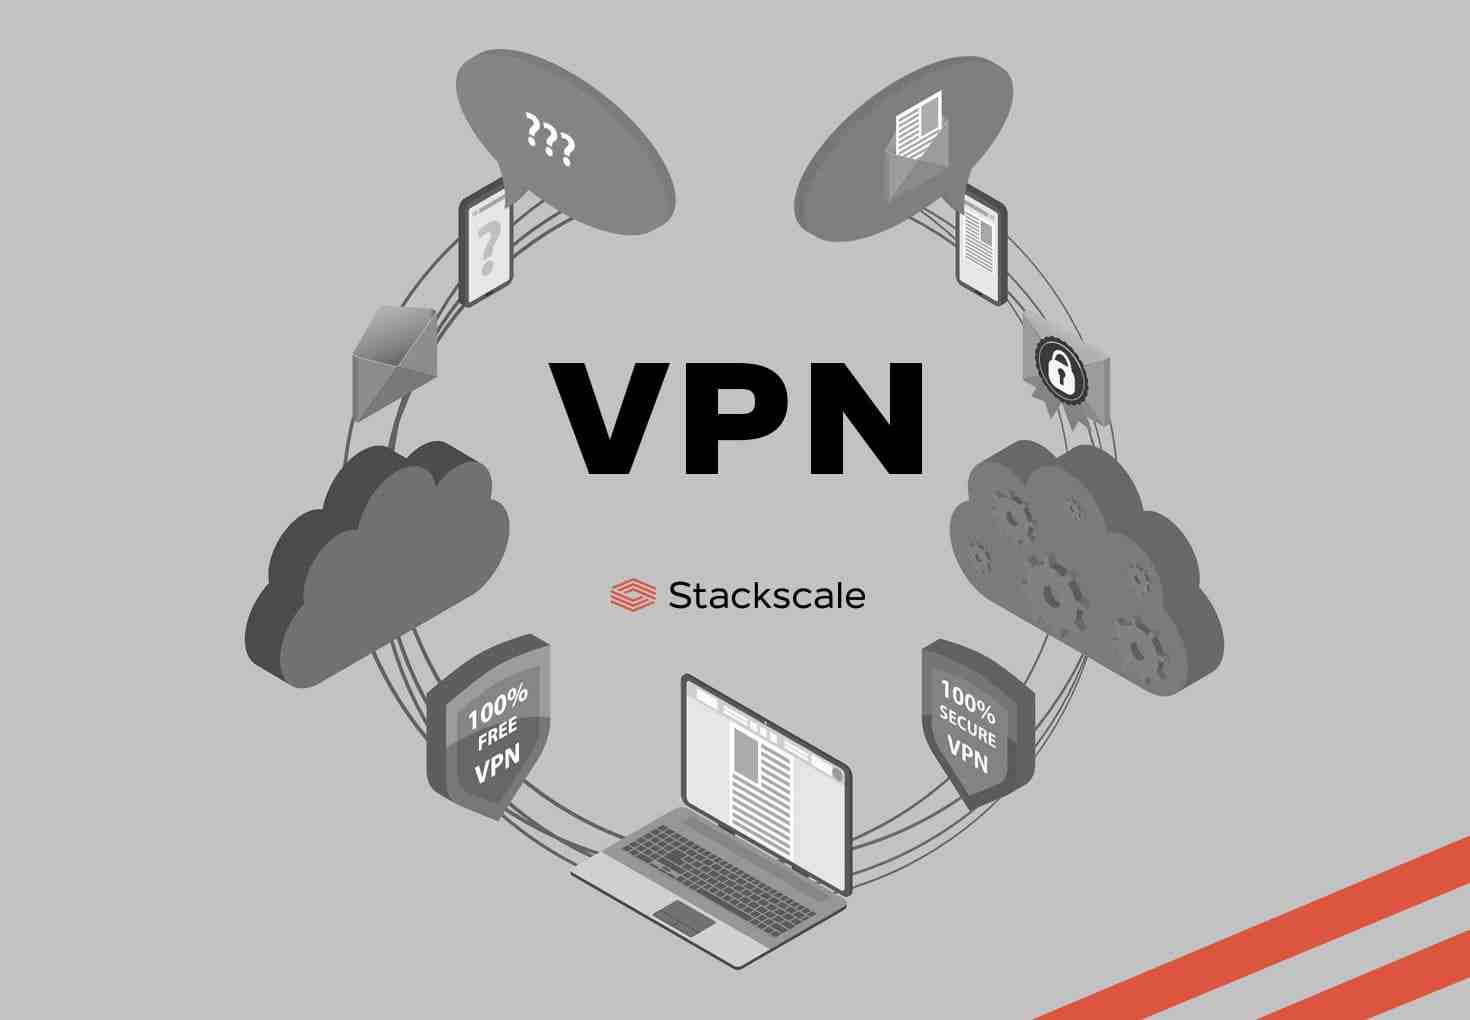 What VPN is free and safe?